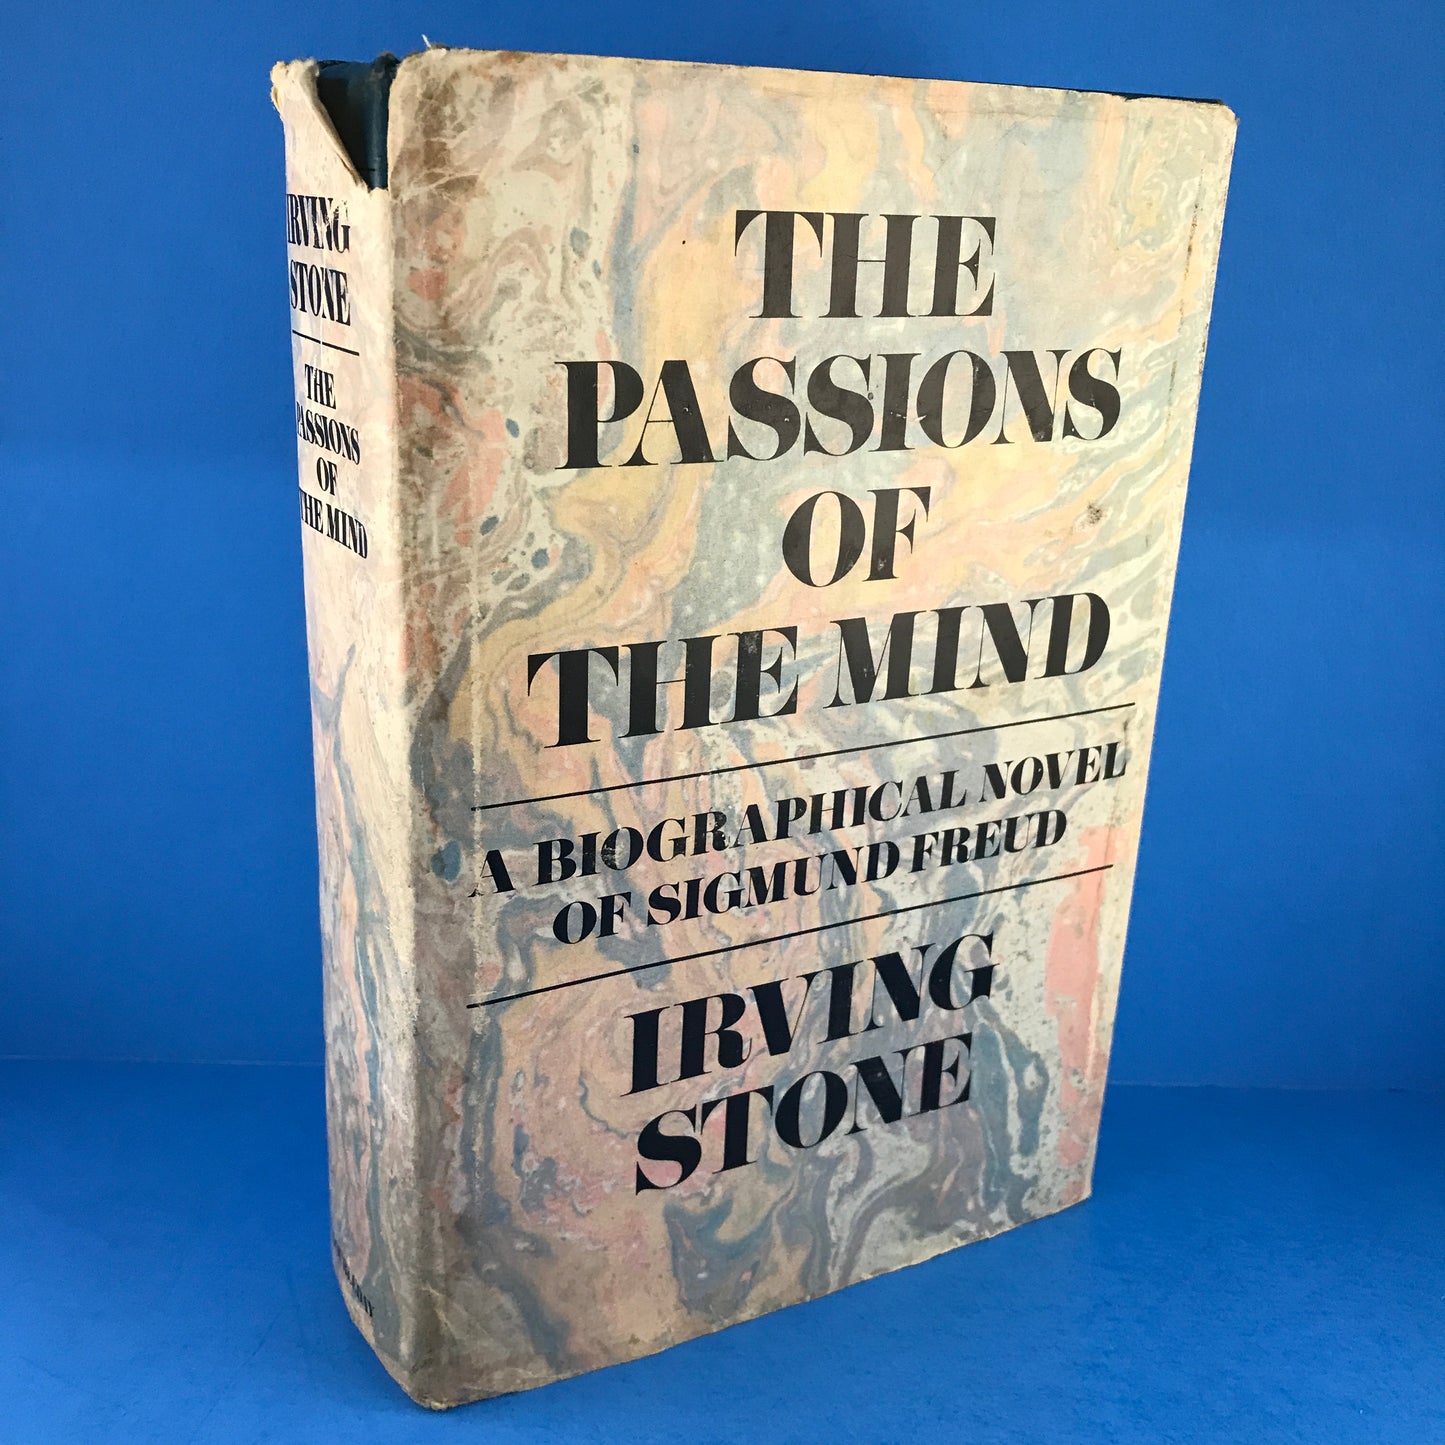 The Passions of the Mind: A Biographical Novel of Sigmund Freud